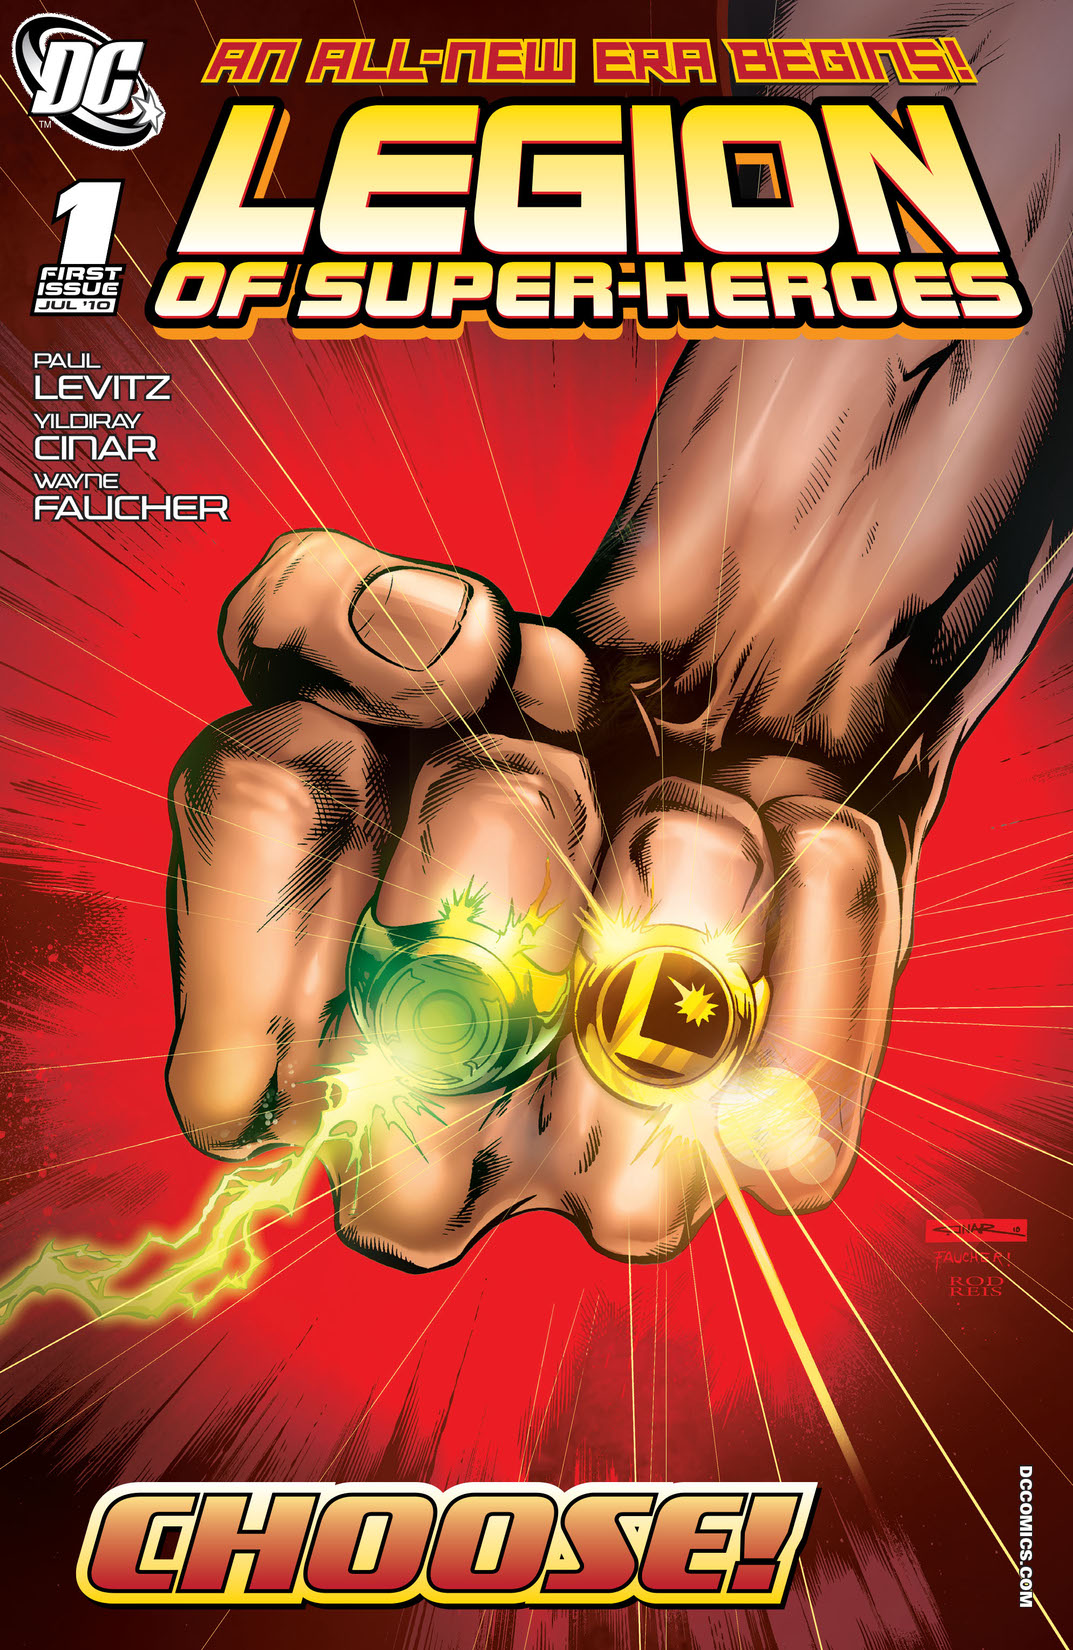 Legion of Super-Heroes (2010-) #1 preview images